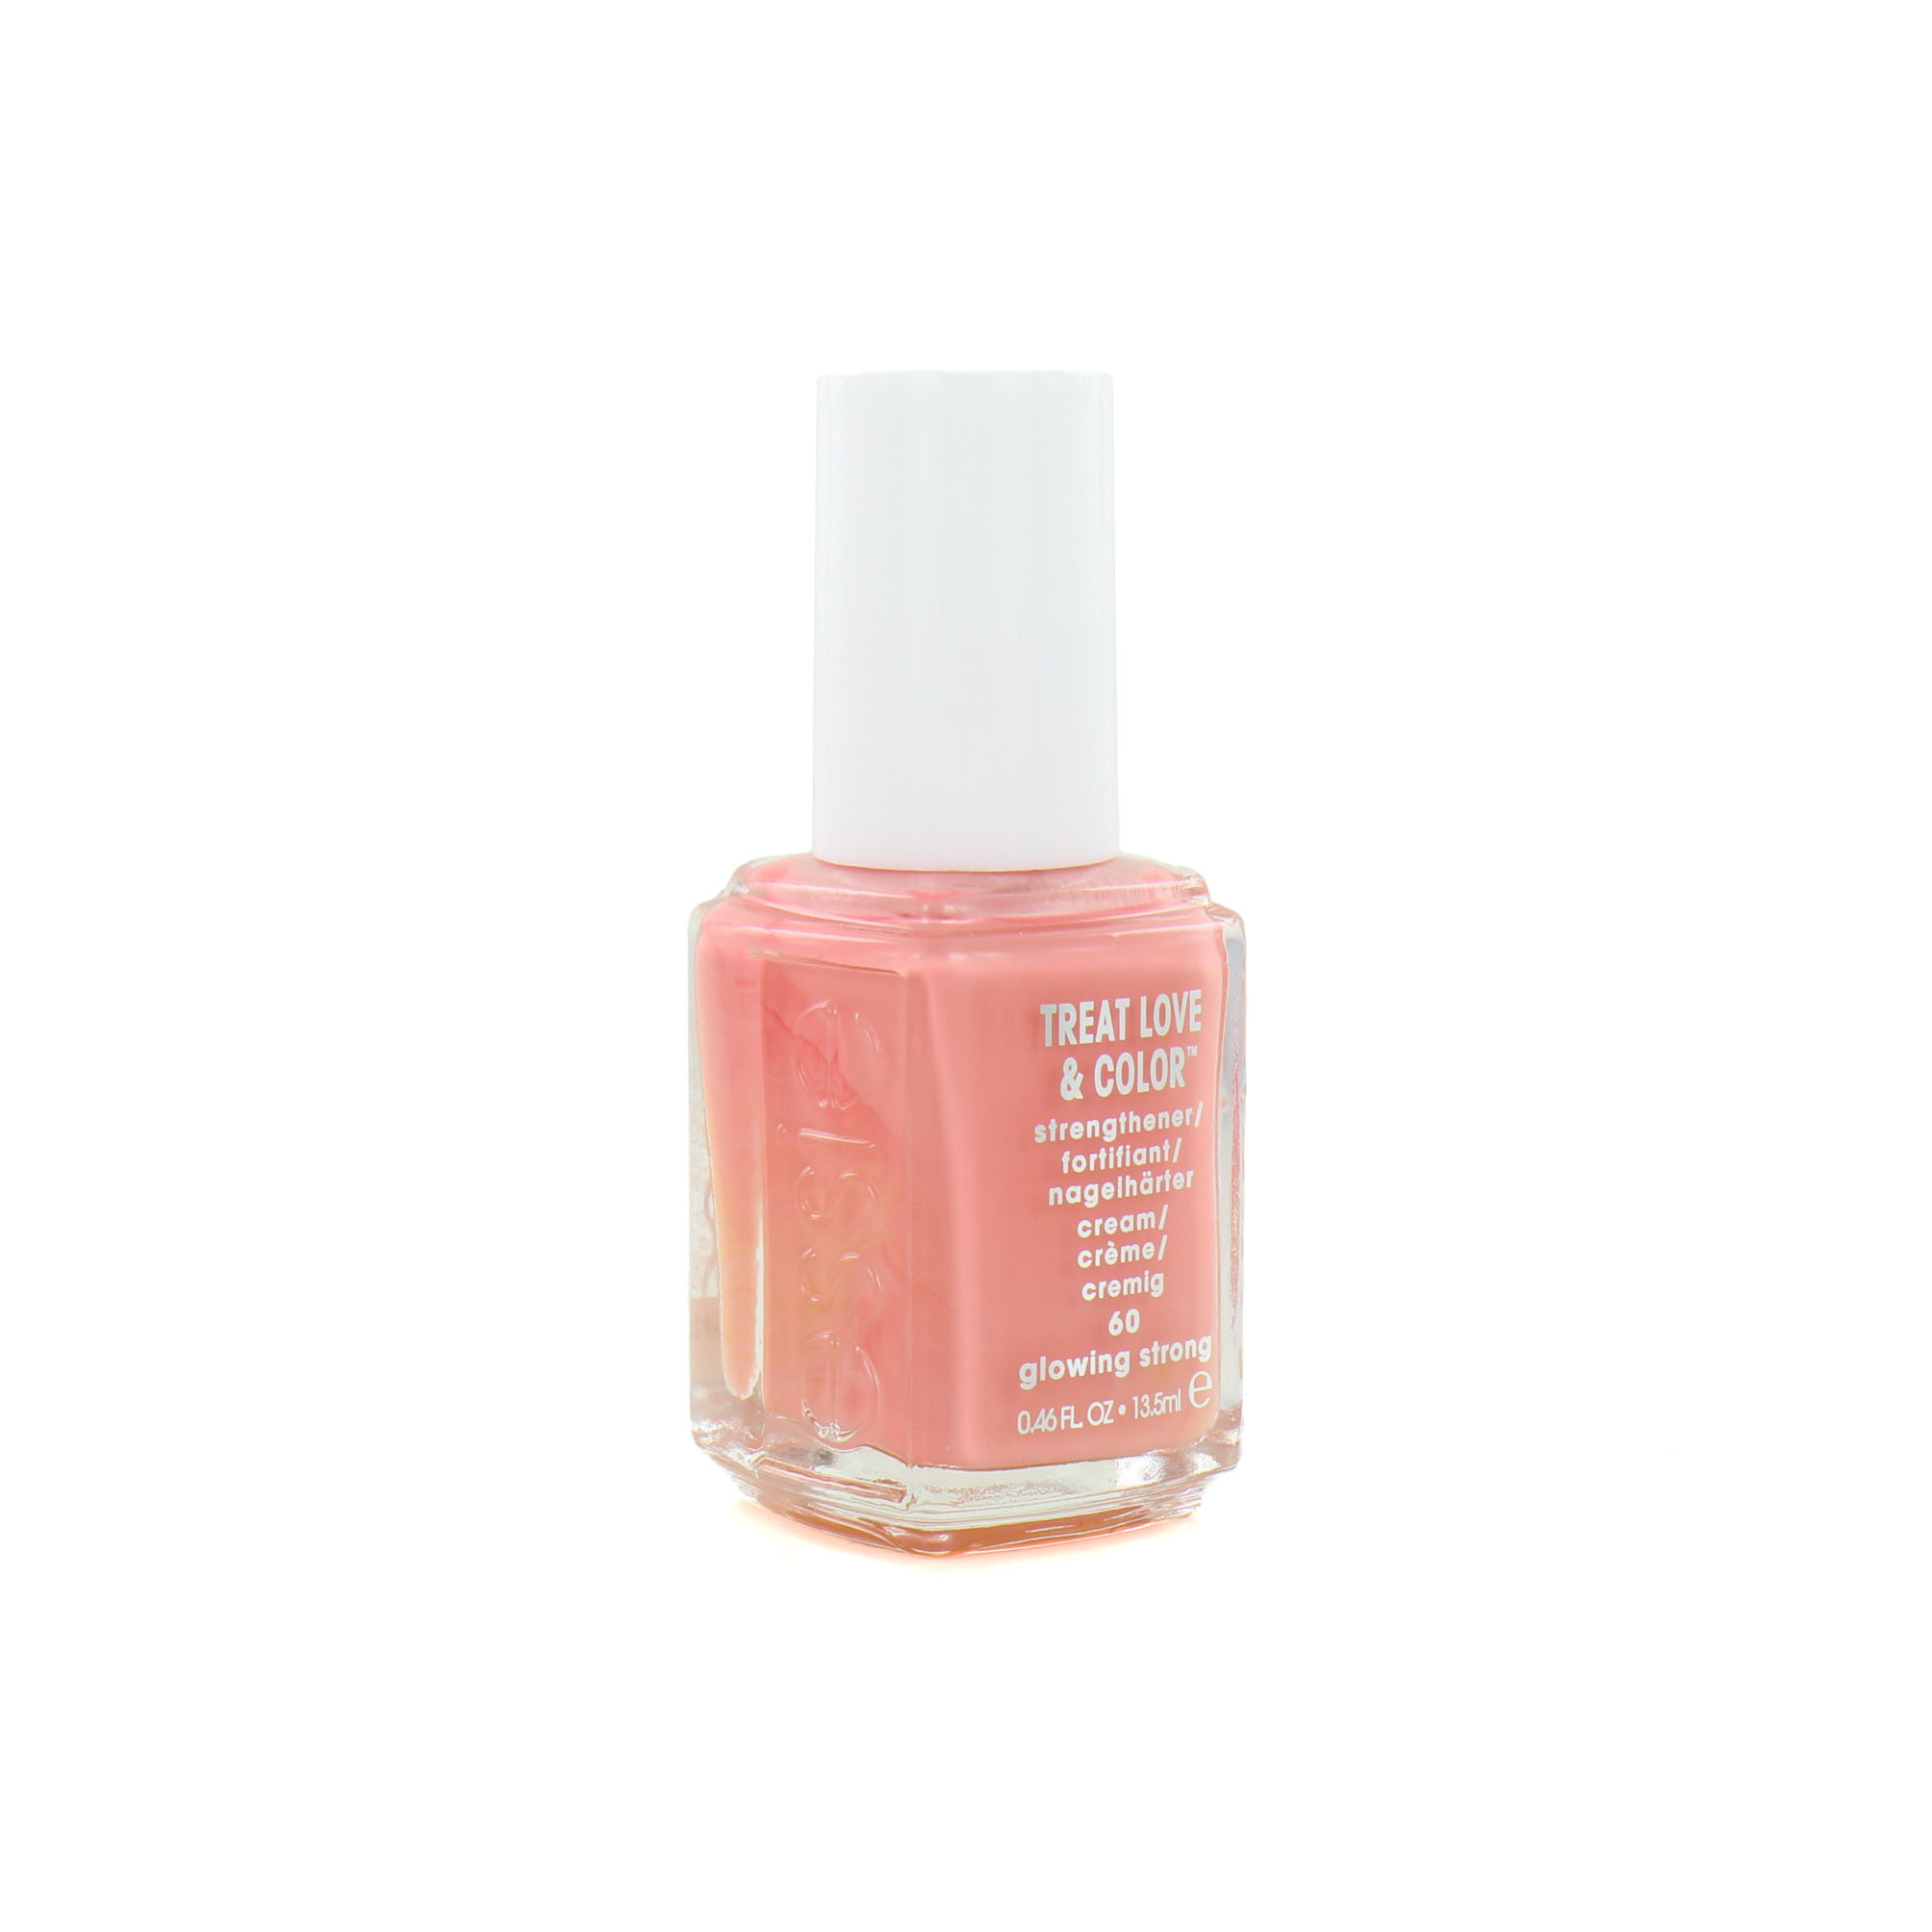 Essie Love - Strengthener Strong Treat Kaufen 60 Color & Blisso - Glowing